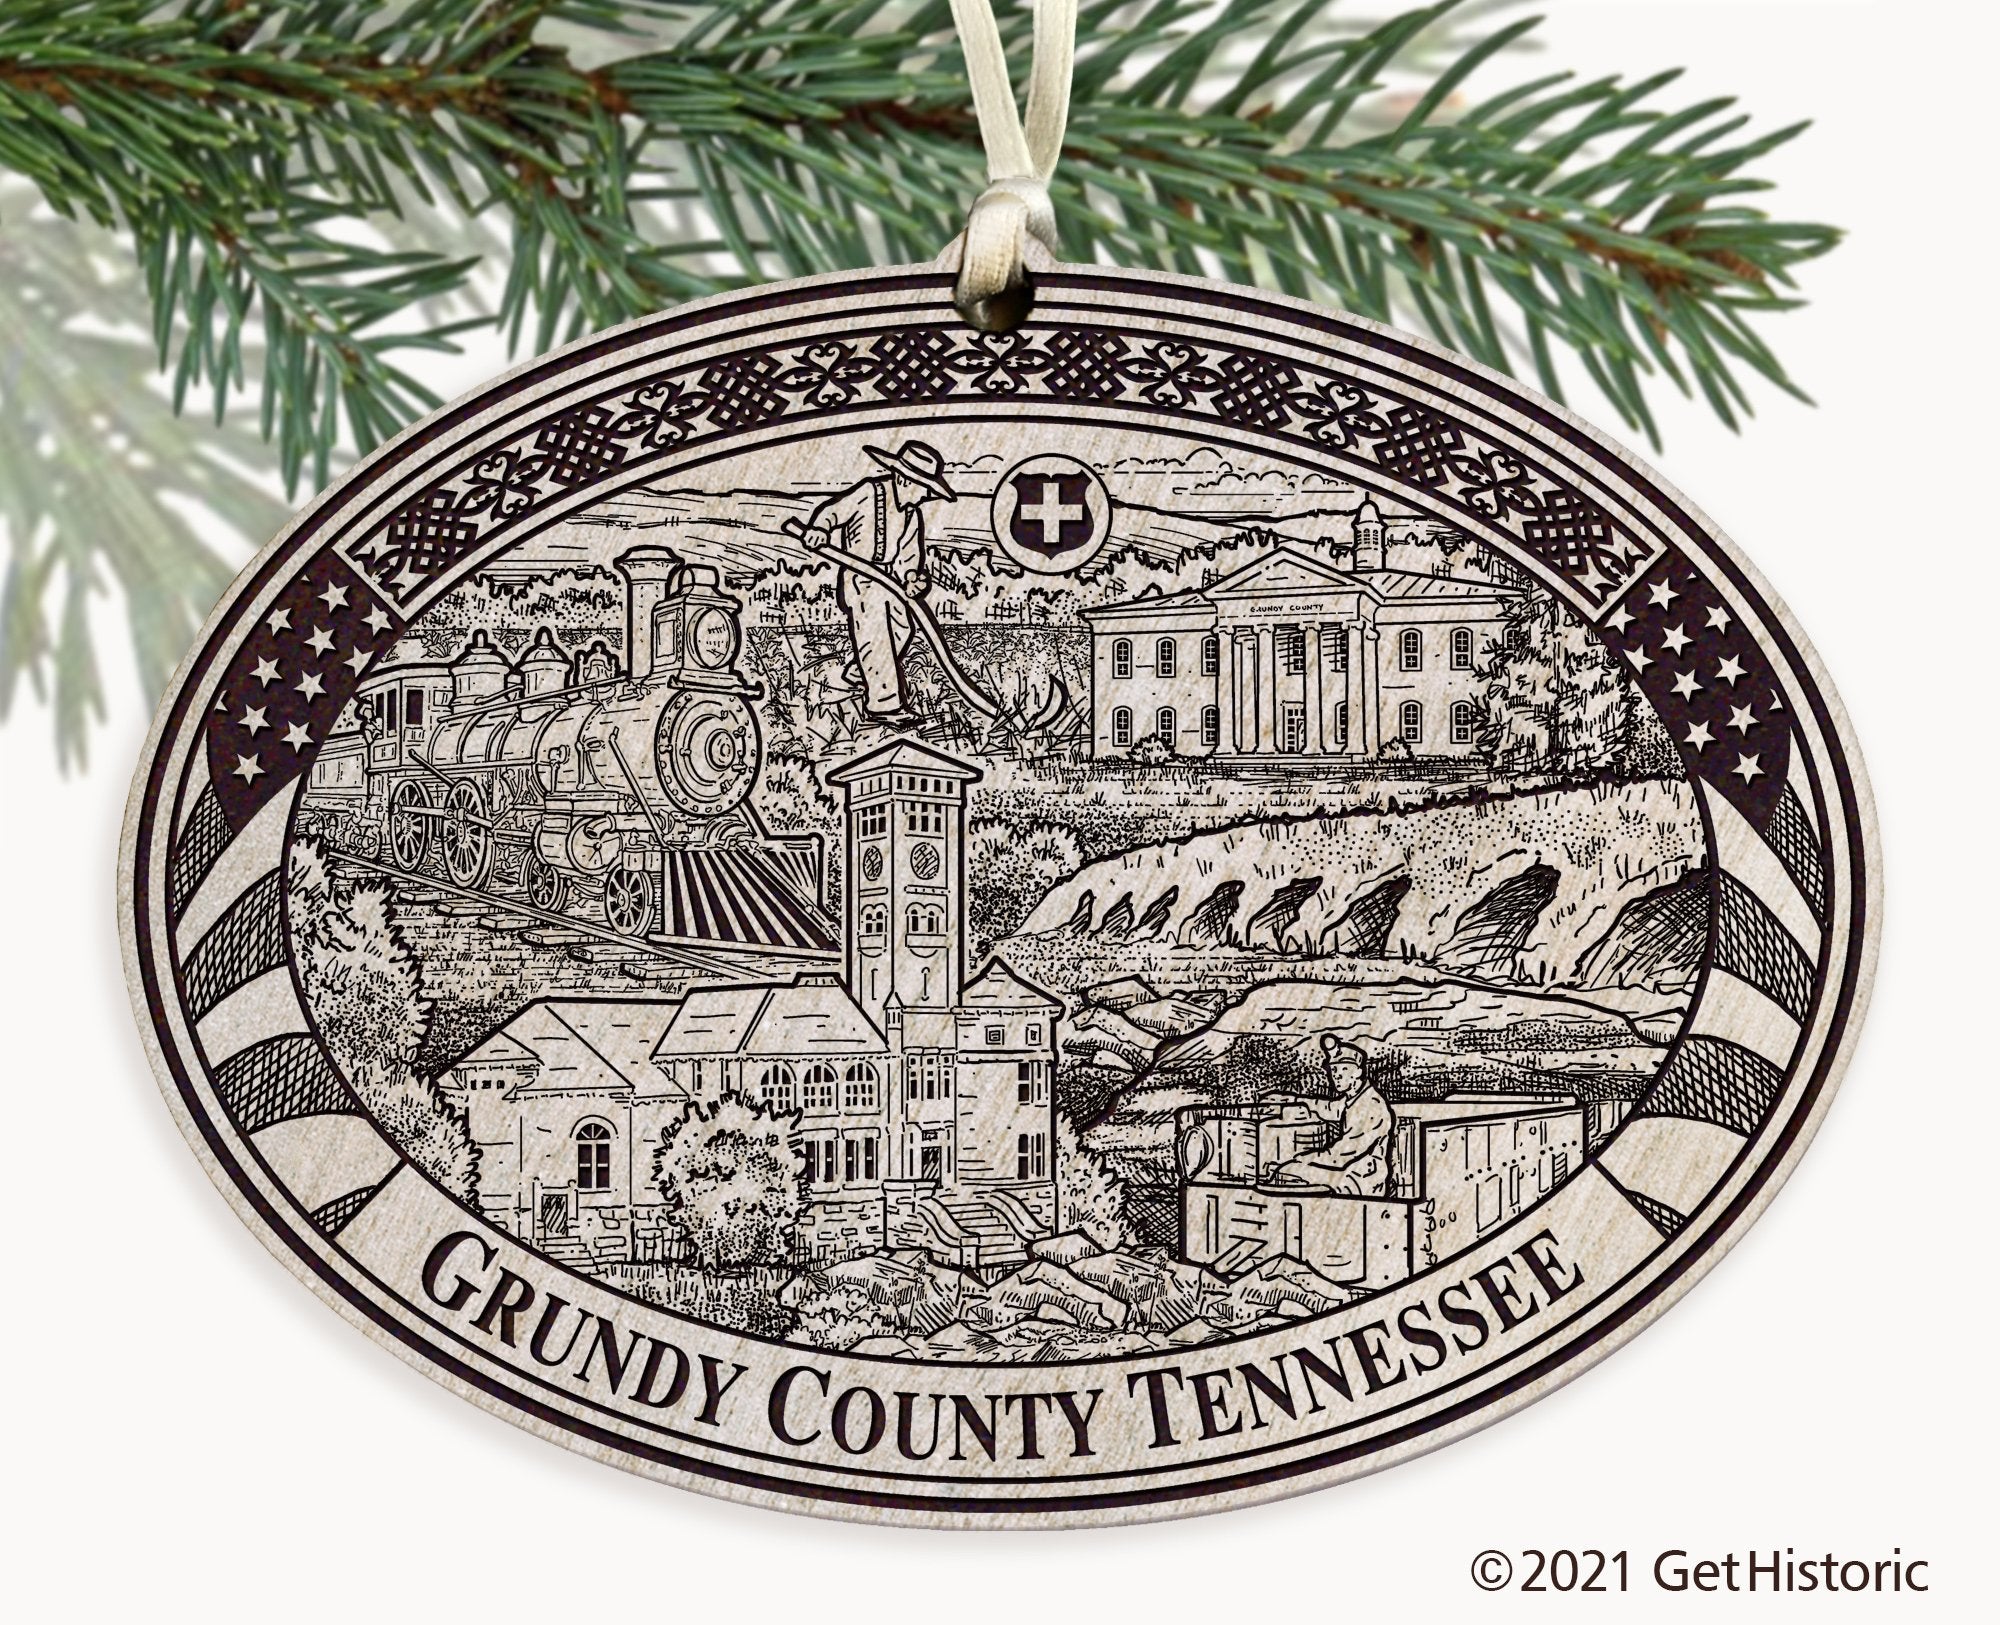 Grundy County Tennessee Engraved Ornament